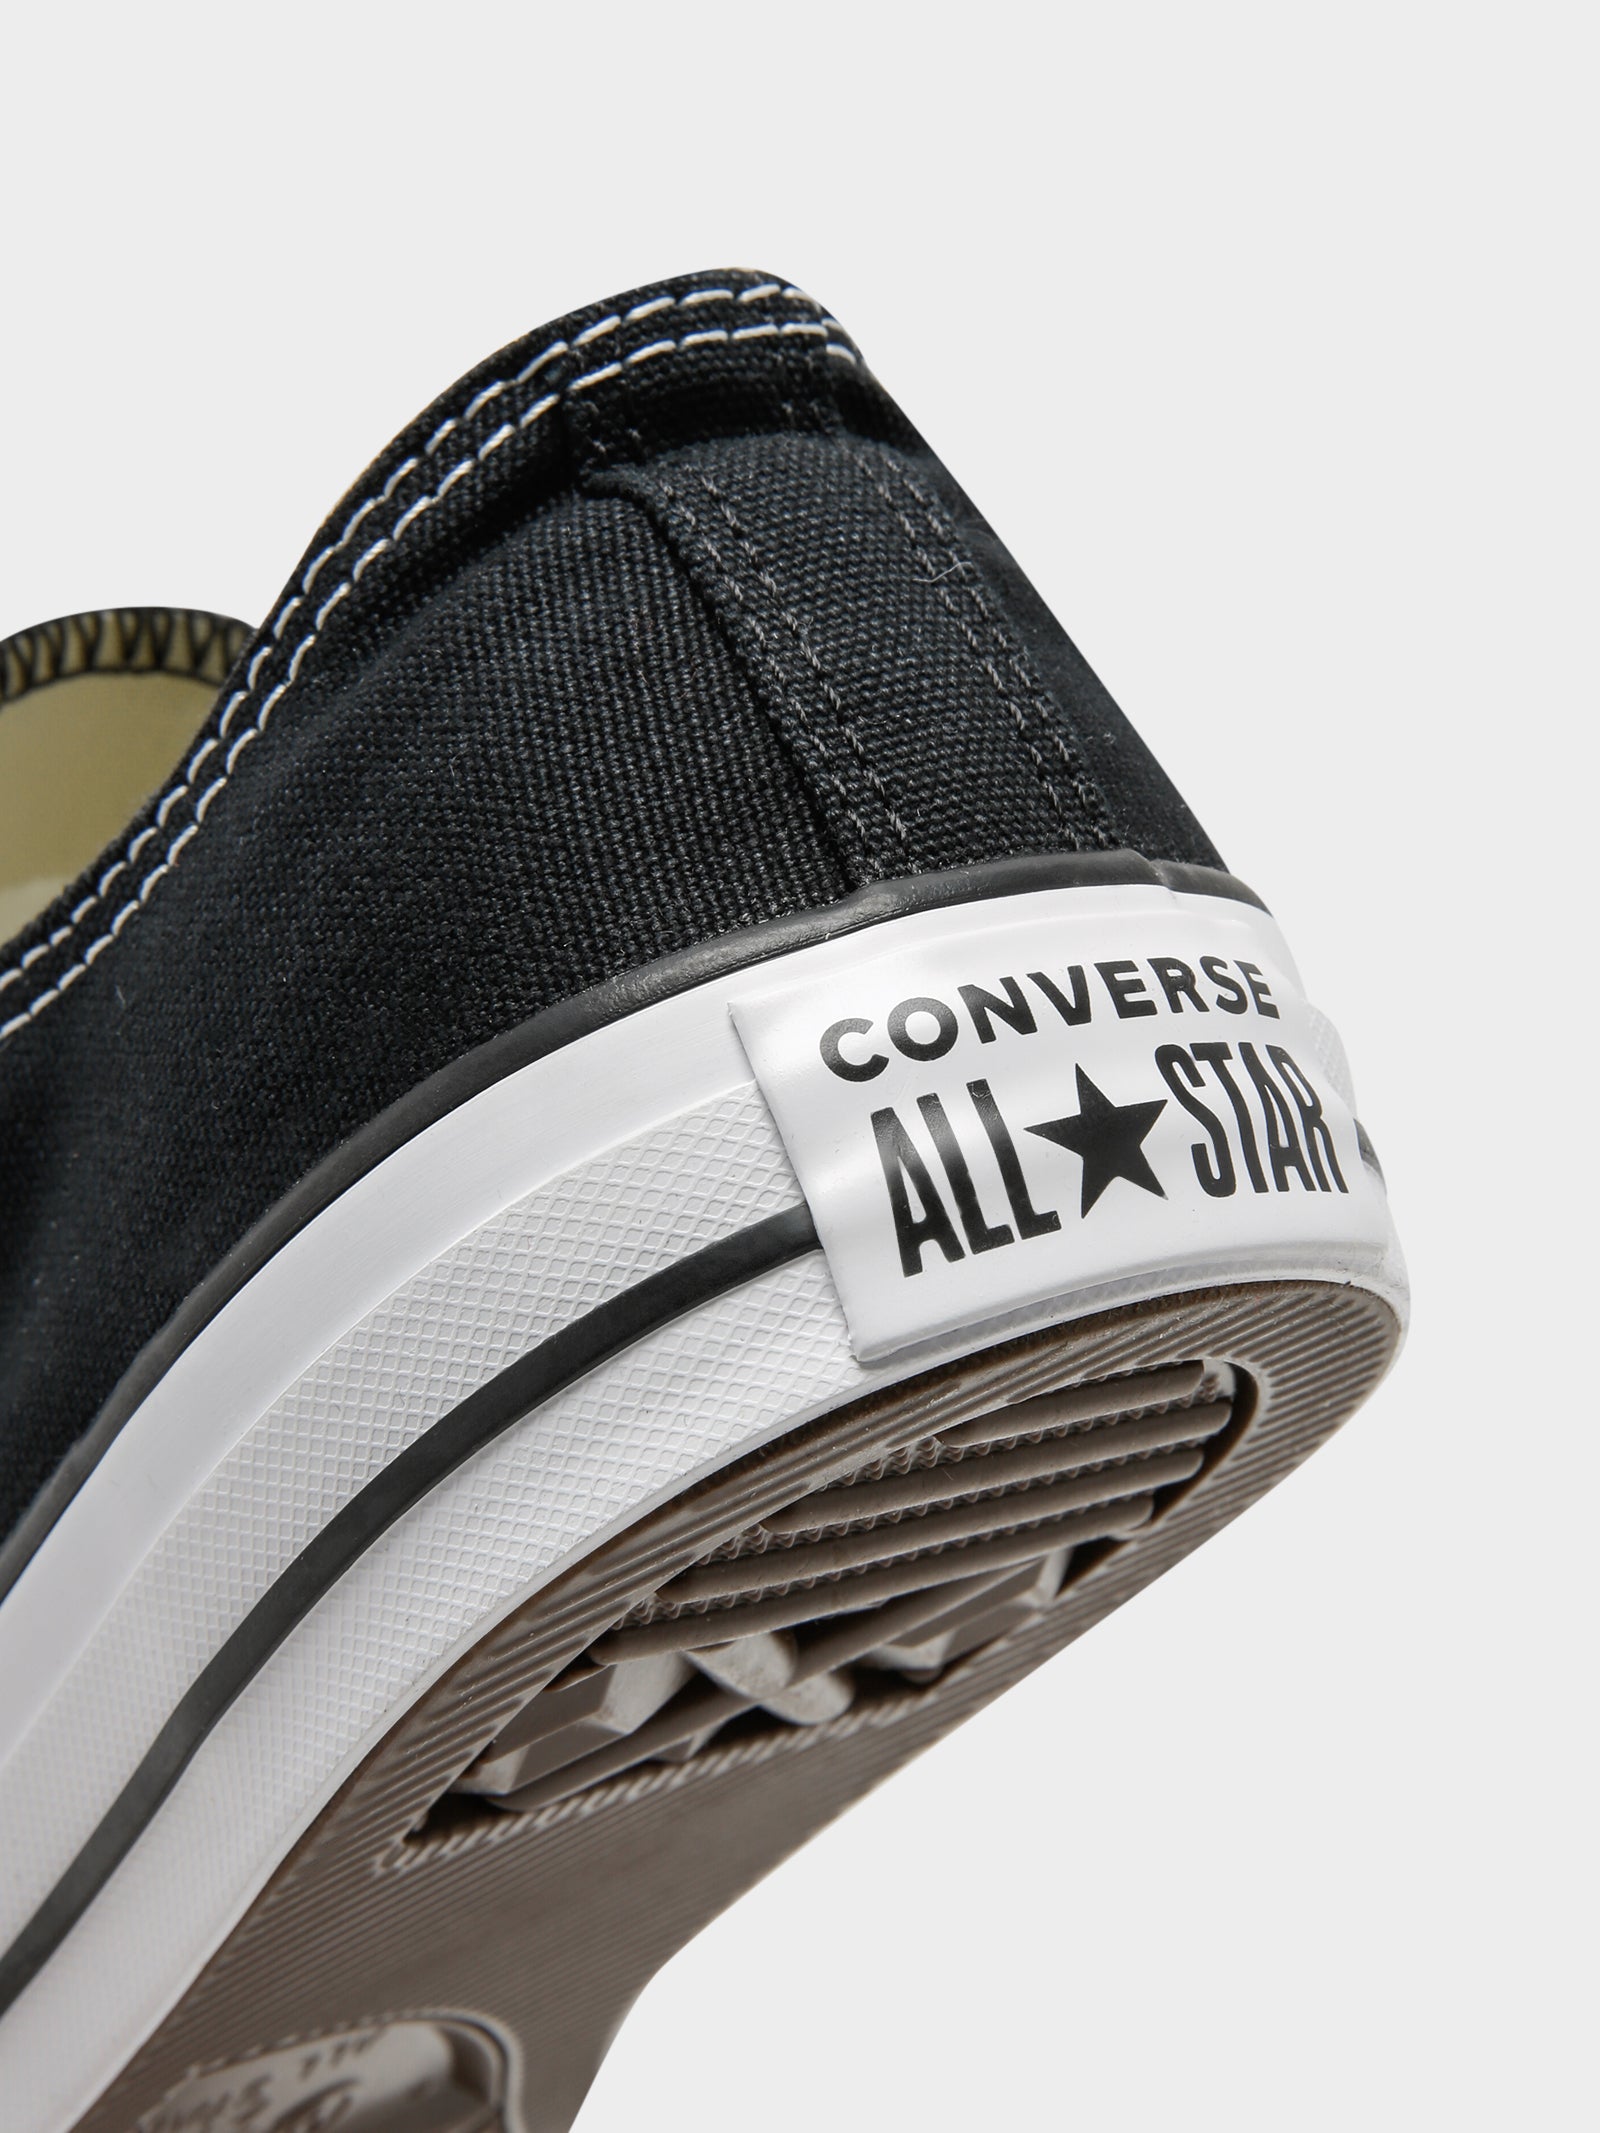 Unisex Chuck Taylor All Star Classic Low-Top Sneakers in Black